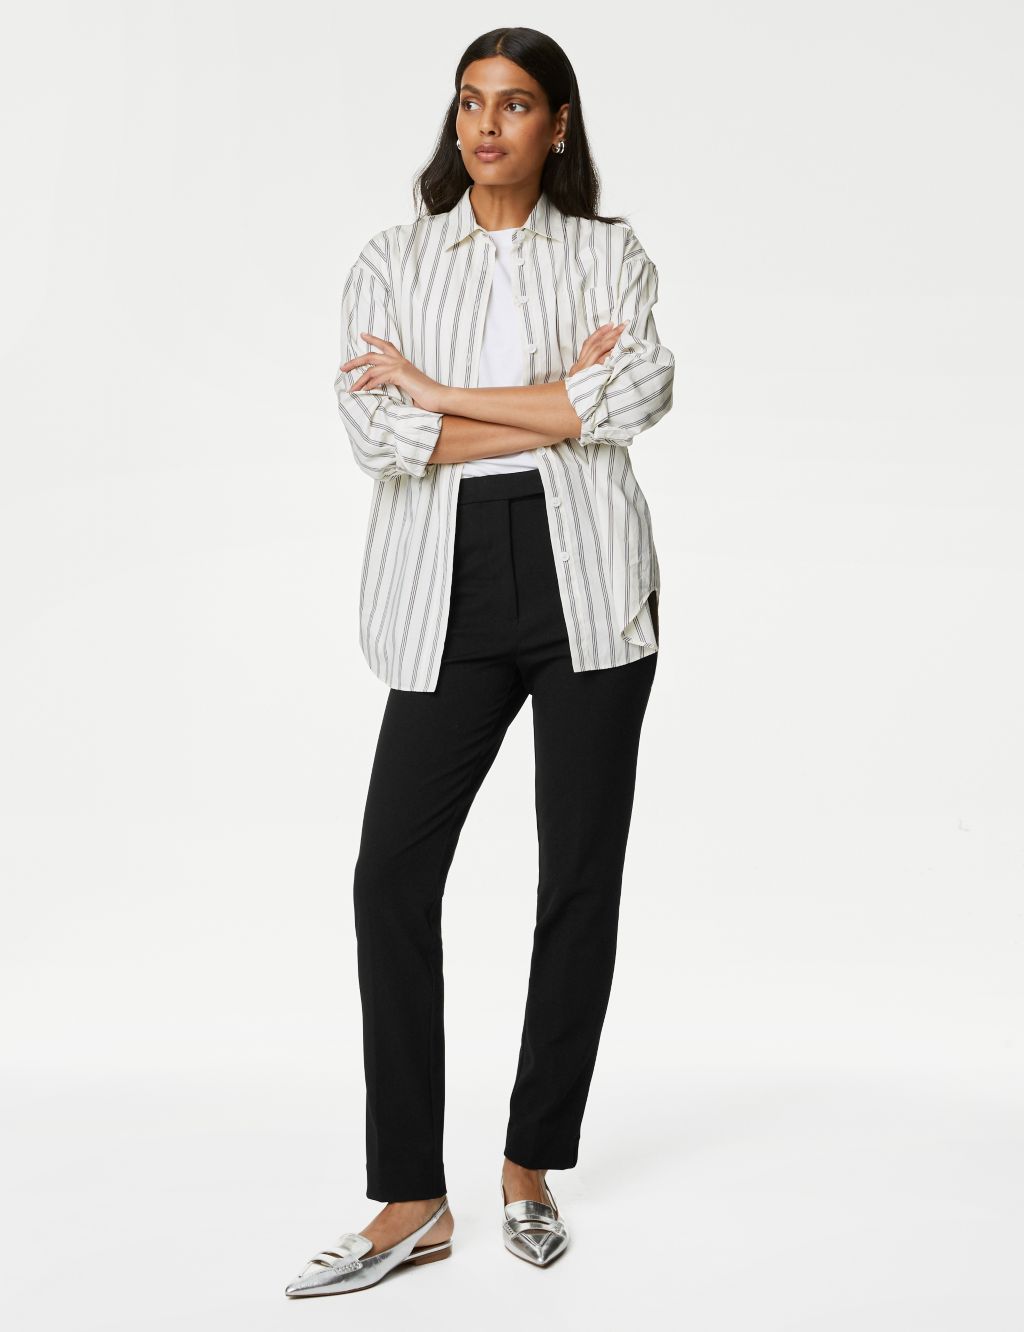 Slim Fit Ankle Grazer Trousers image 1